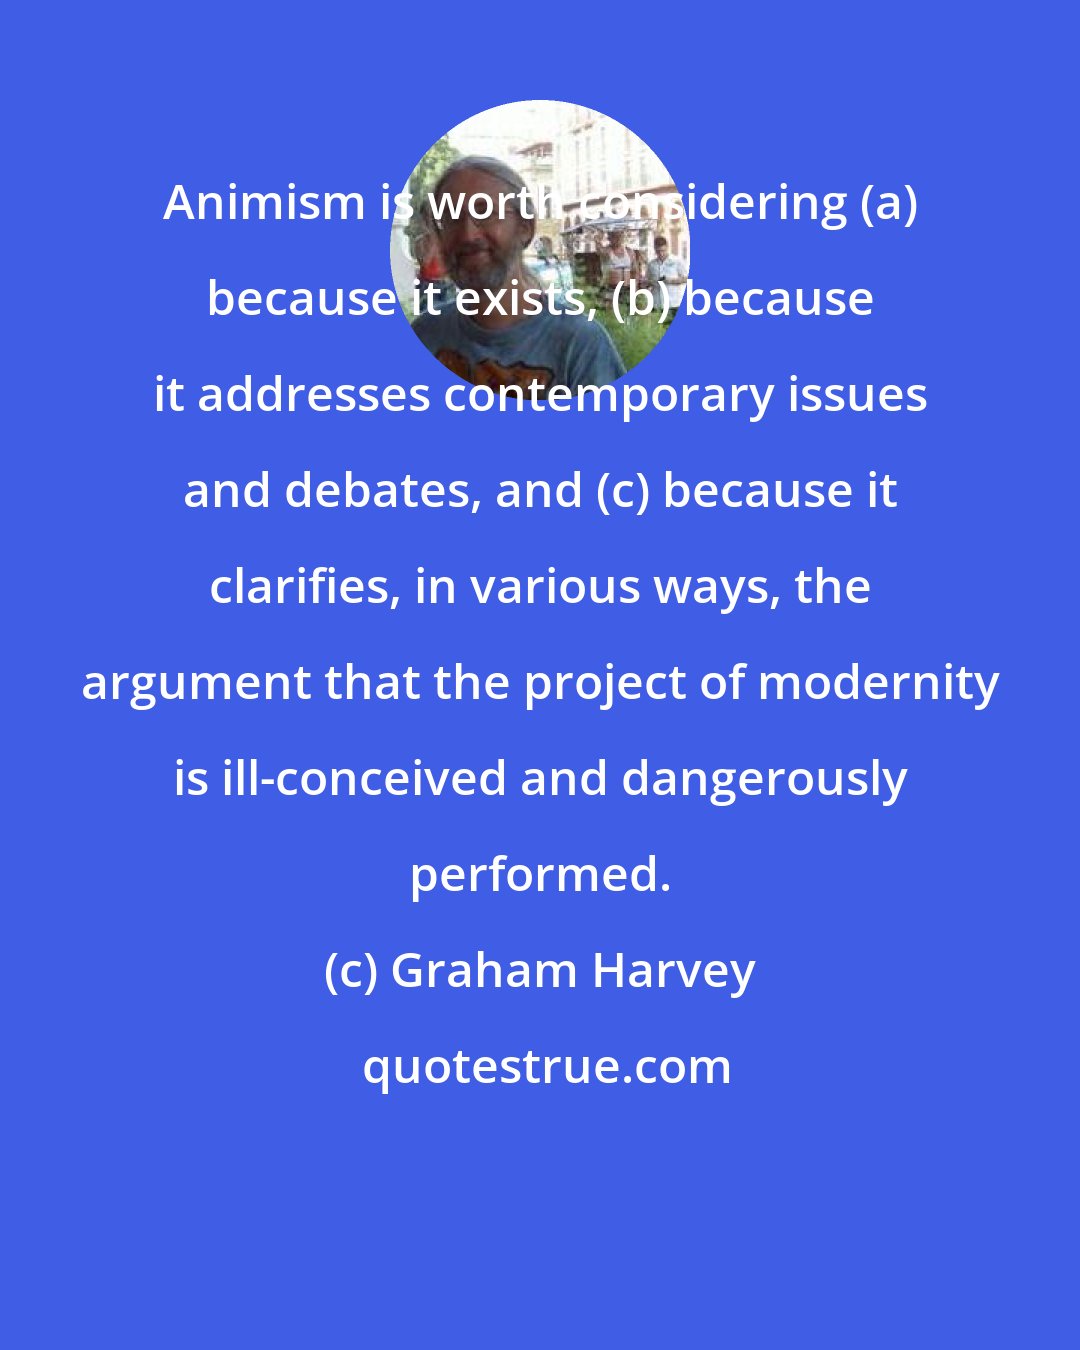 Graham Harvey: Animism is worth considering (a) because it exists, (b) because it addresses contemporary issues and debates, and (c) because it clarifies, in various ways, the argument that the project of modernity is ill-conceived and dangerously performed.